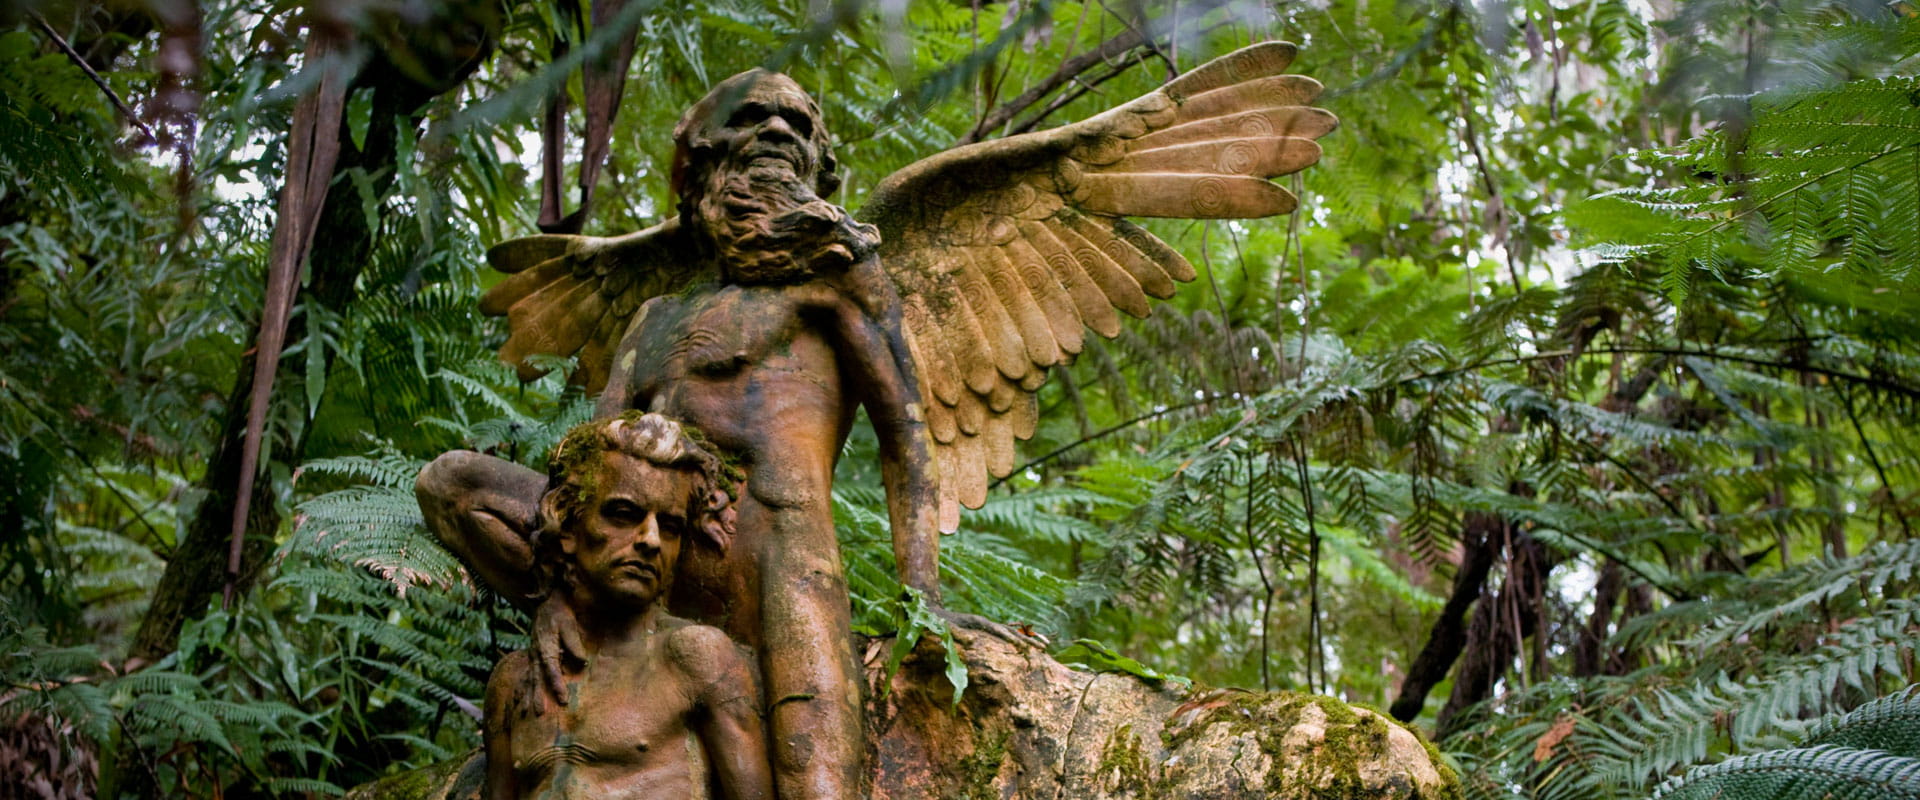 Sculpture by William Ricketts surrounded by lush green foliage. 